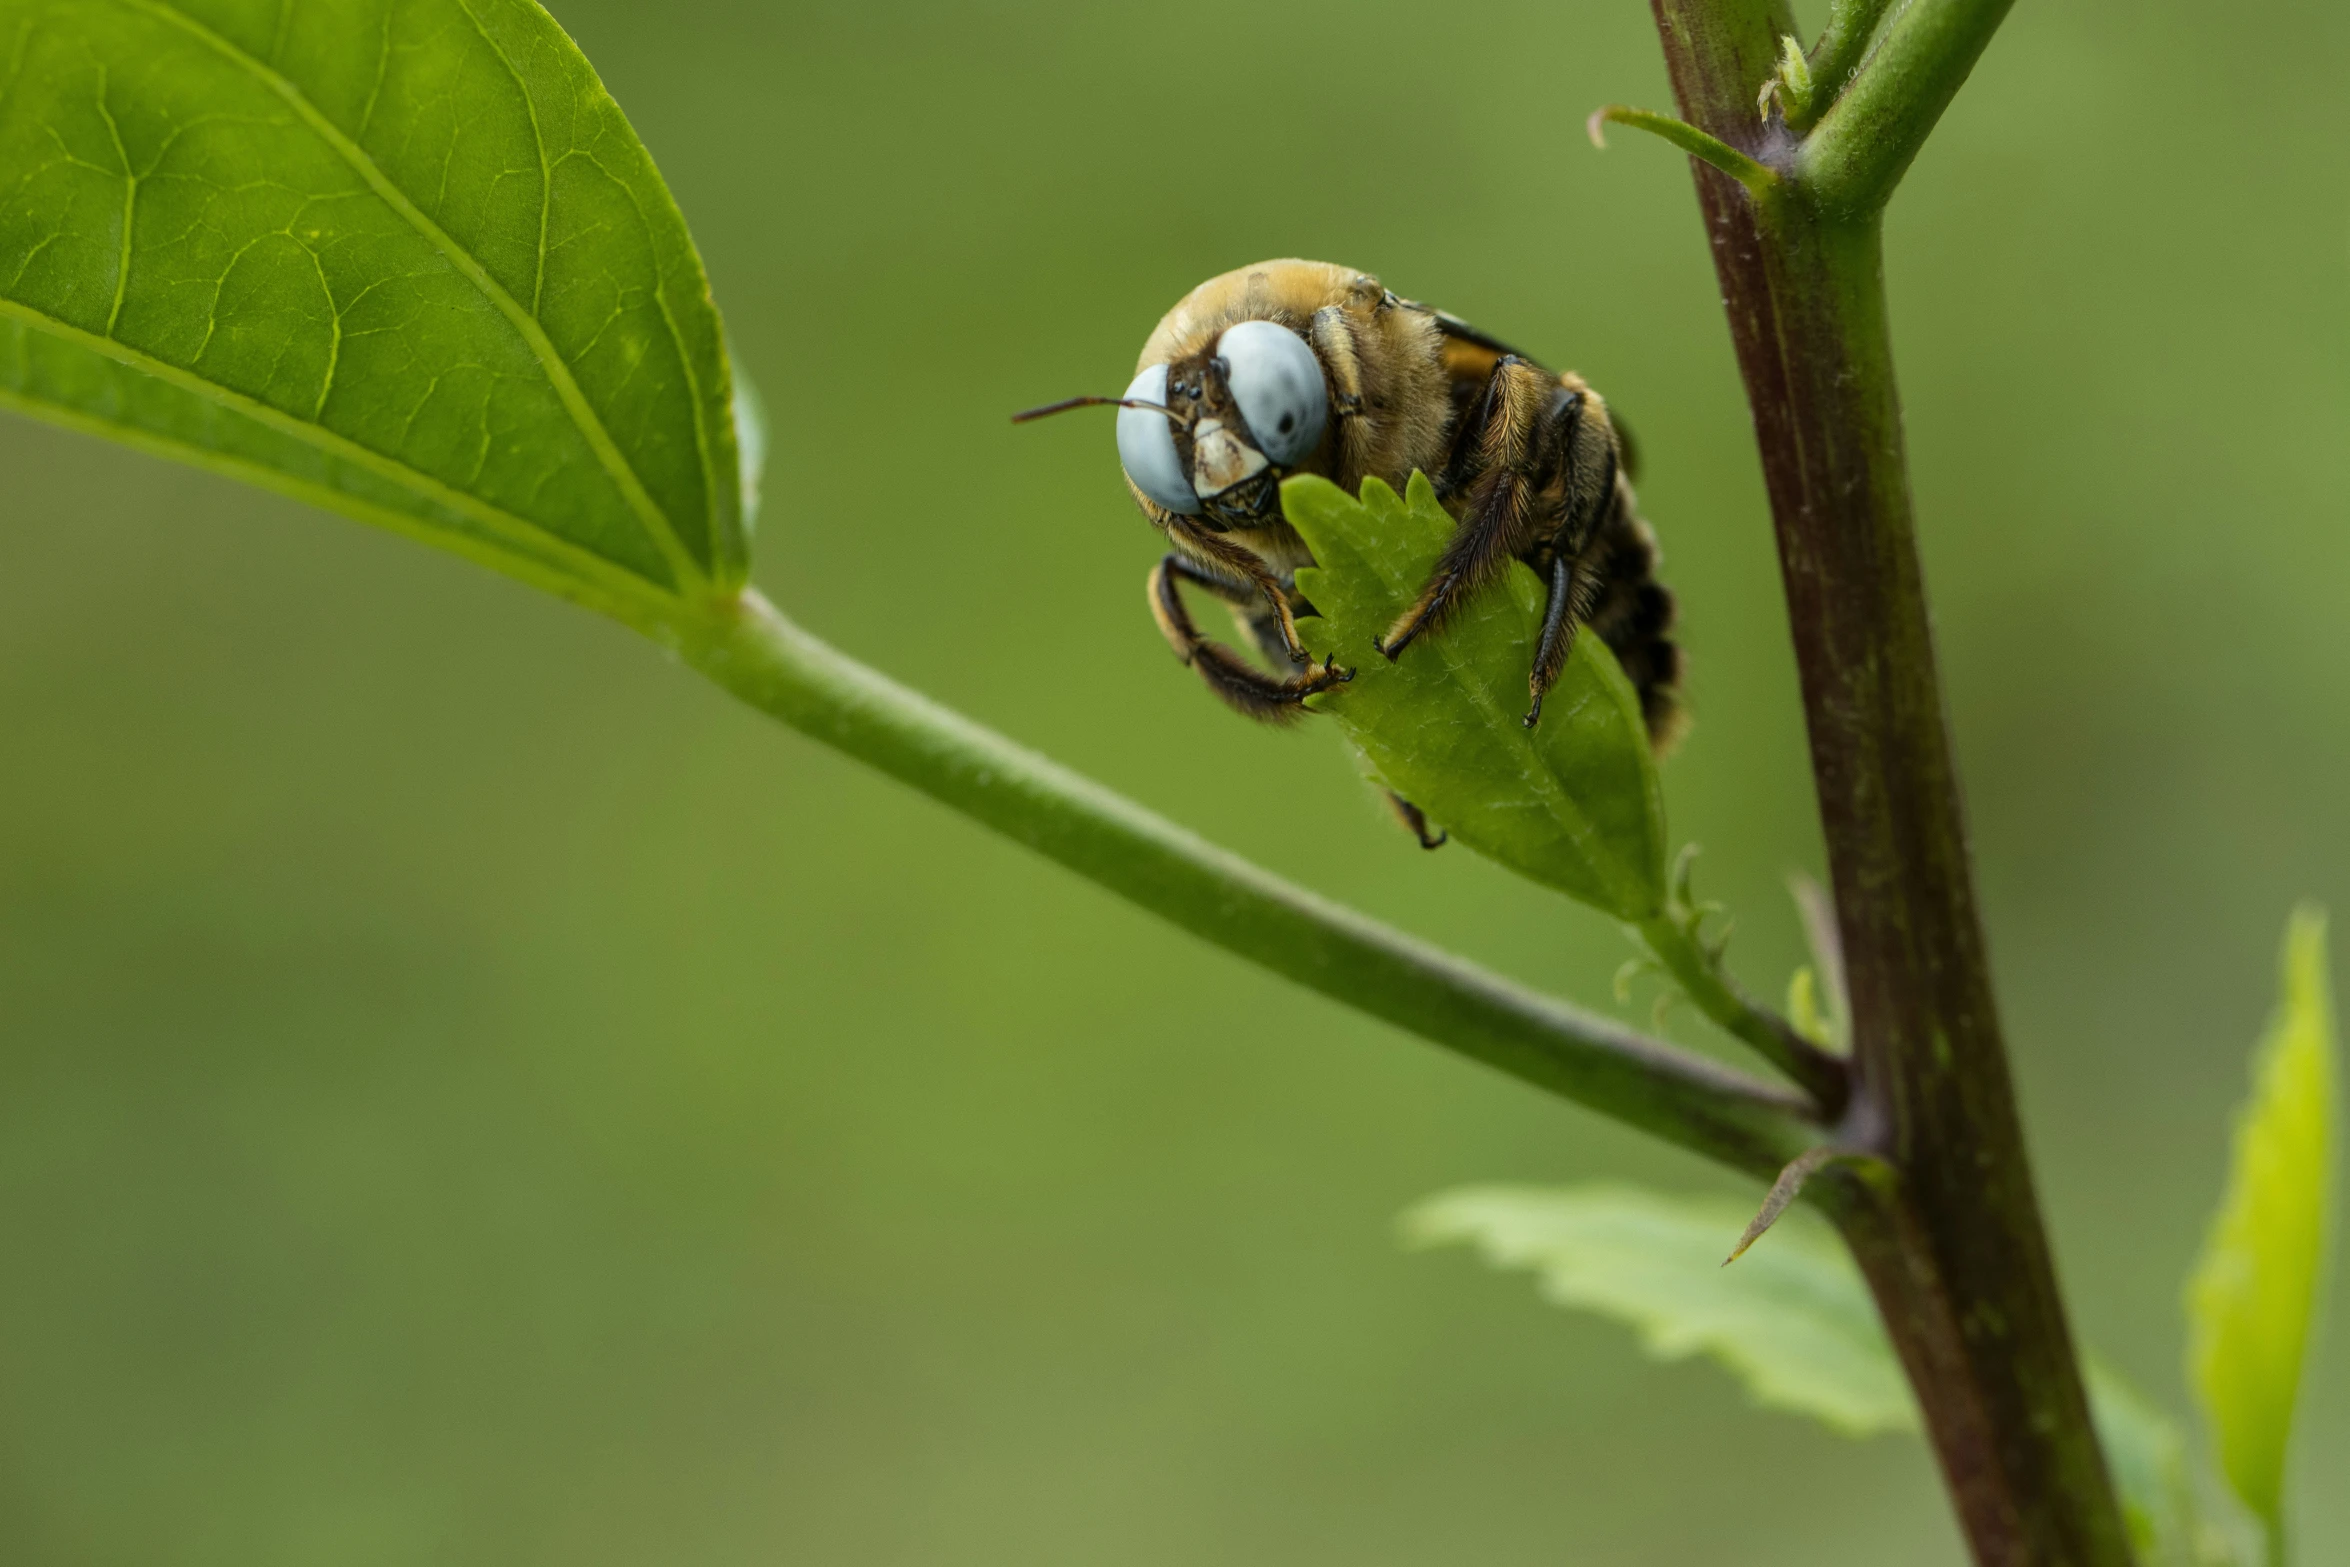 the large, yellow bee is resting on a small green leaf